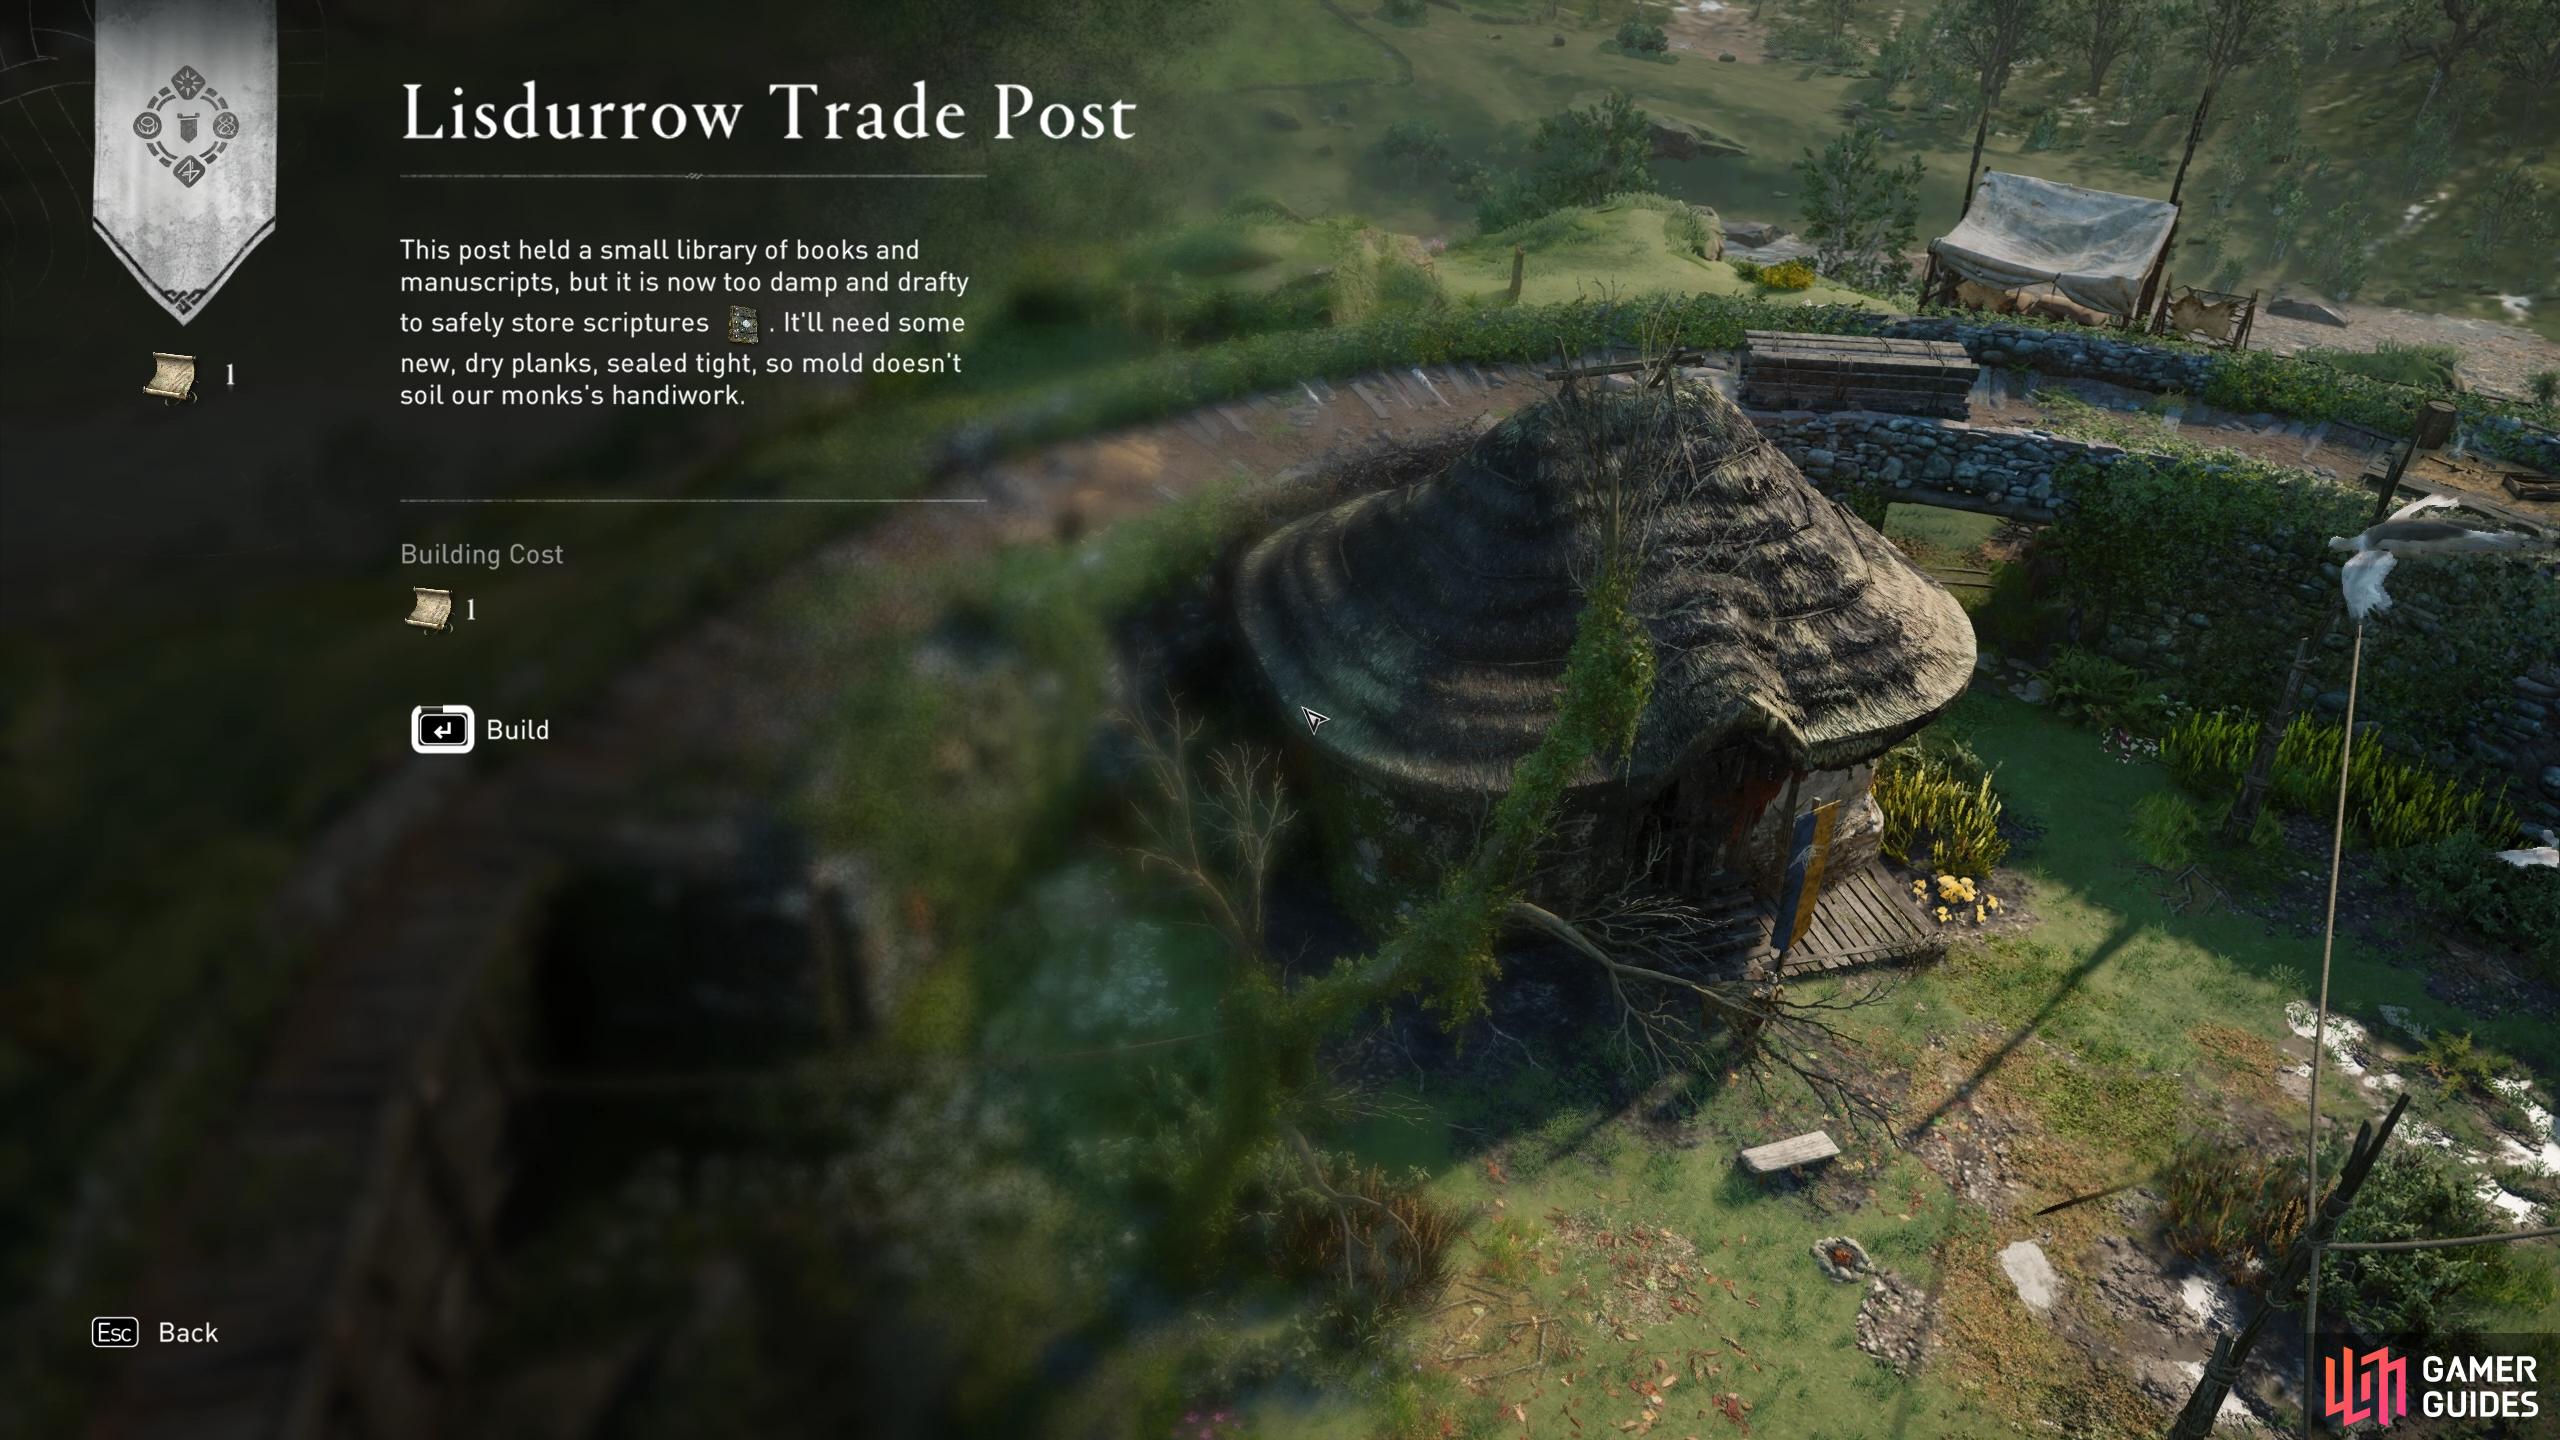 You can build the Lisdurrow trade post once youve obtained the deed.